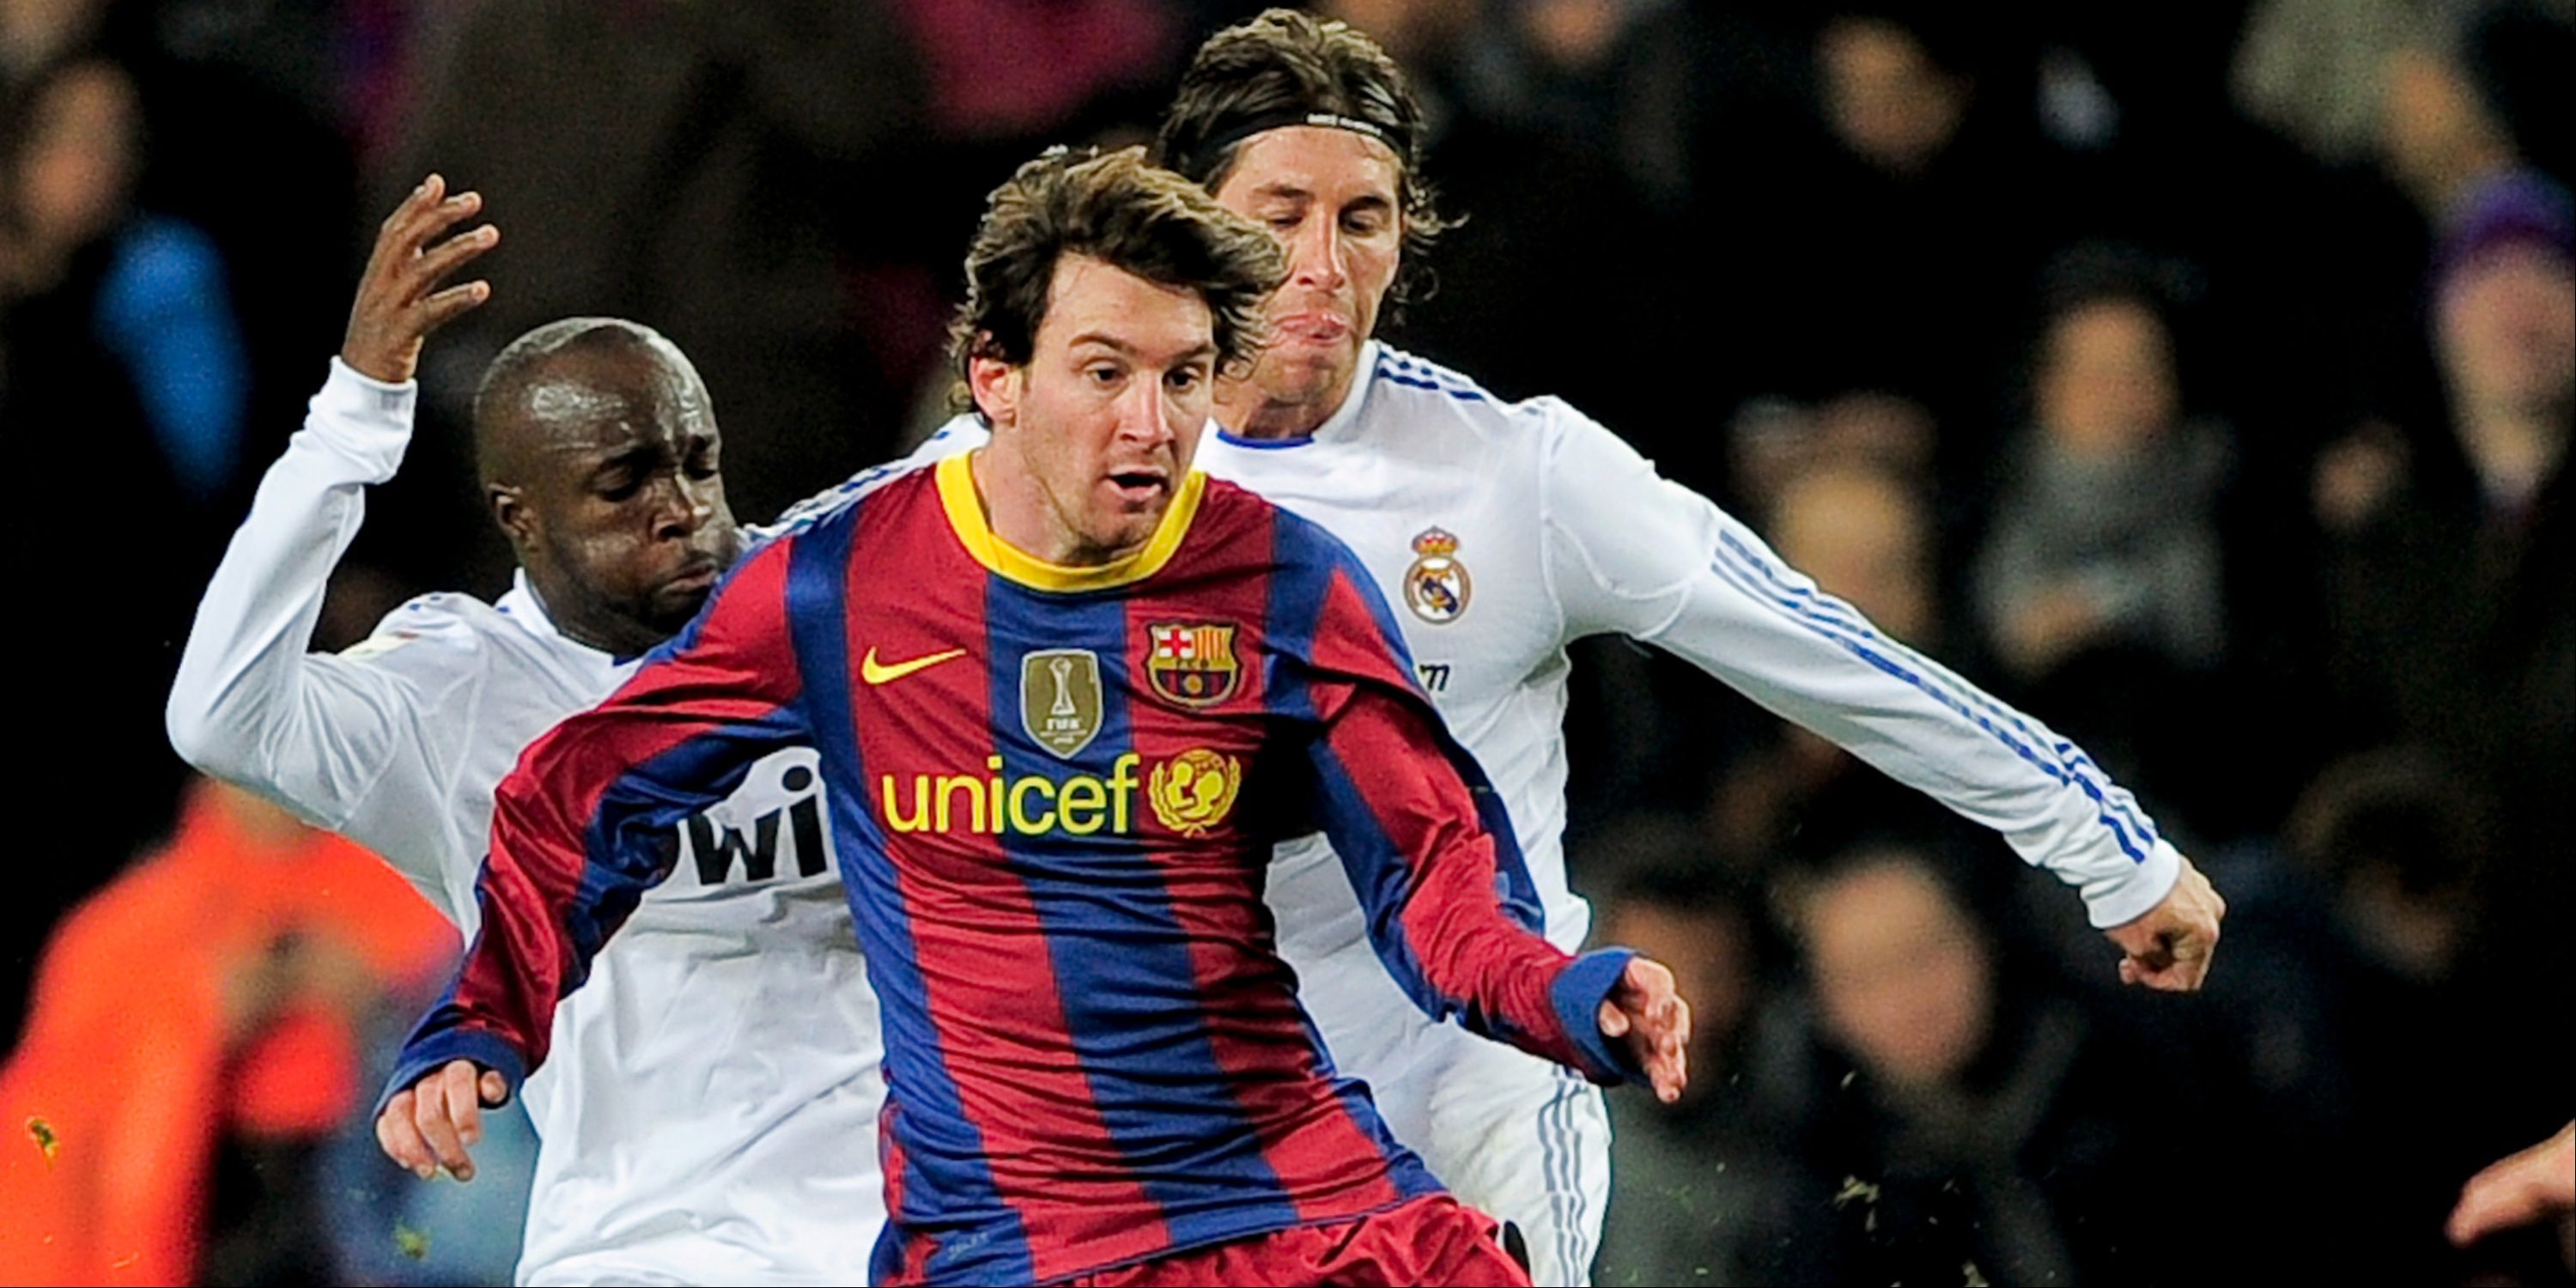 Barcelona's Argentinian forward Lionel Messi (C) vies for the ball with Real Madrid's French midfielder Lassana Diarra (L) and defender Sergio Ramos (R) during the Spanish league 